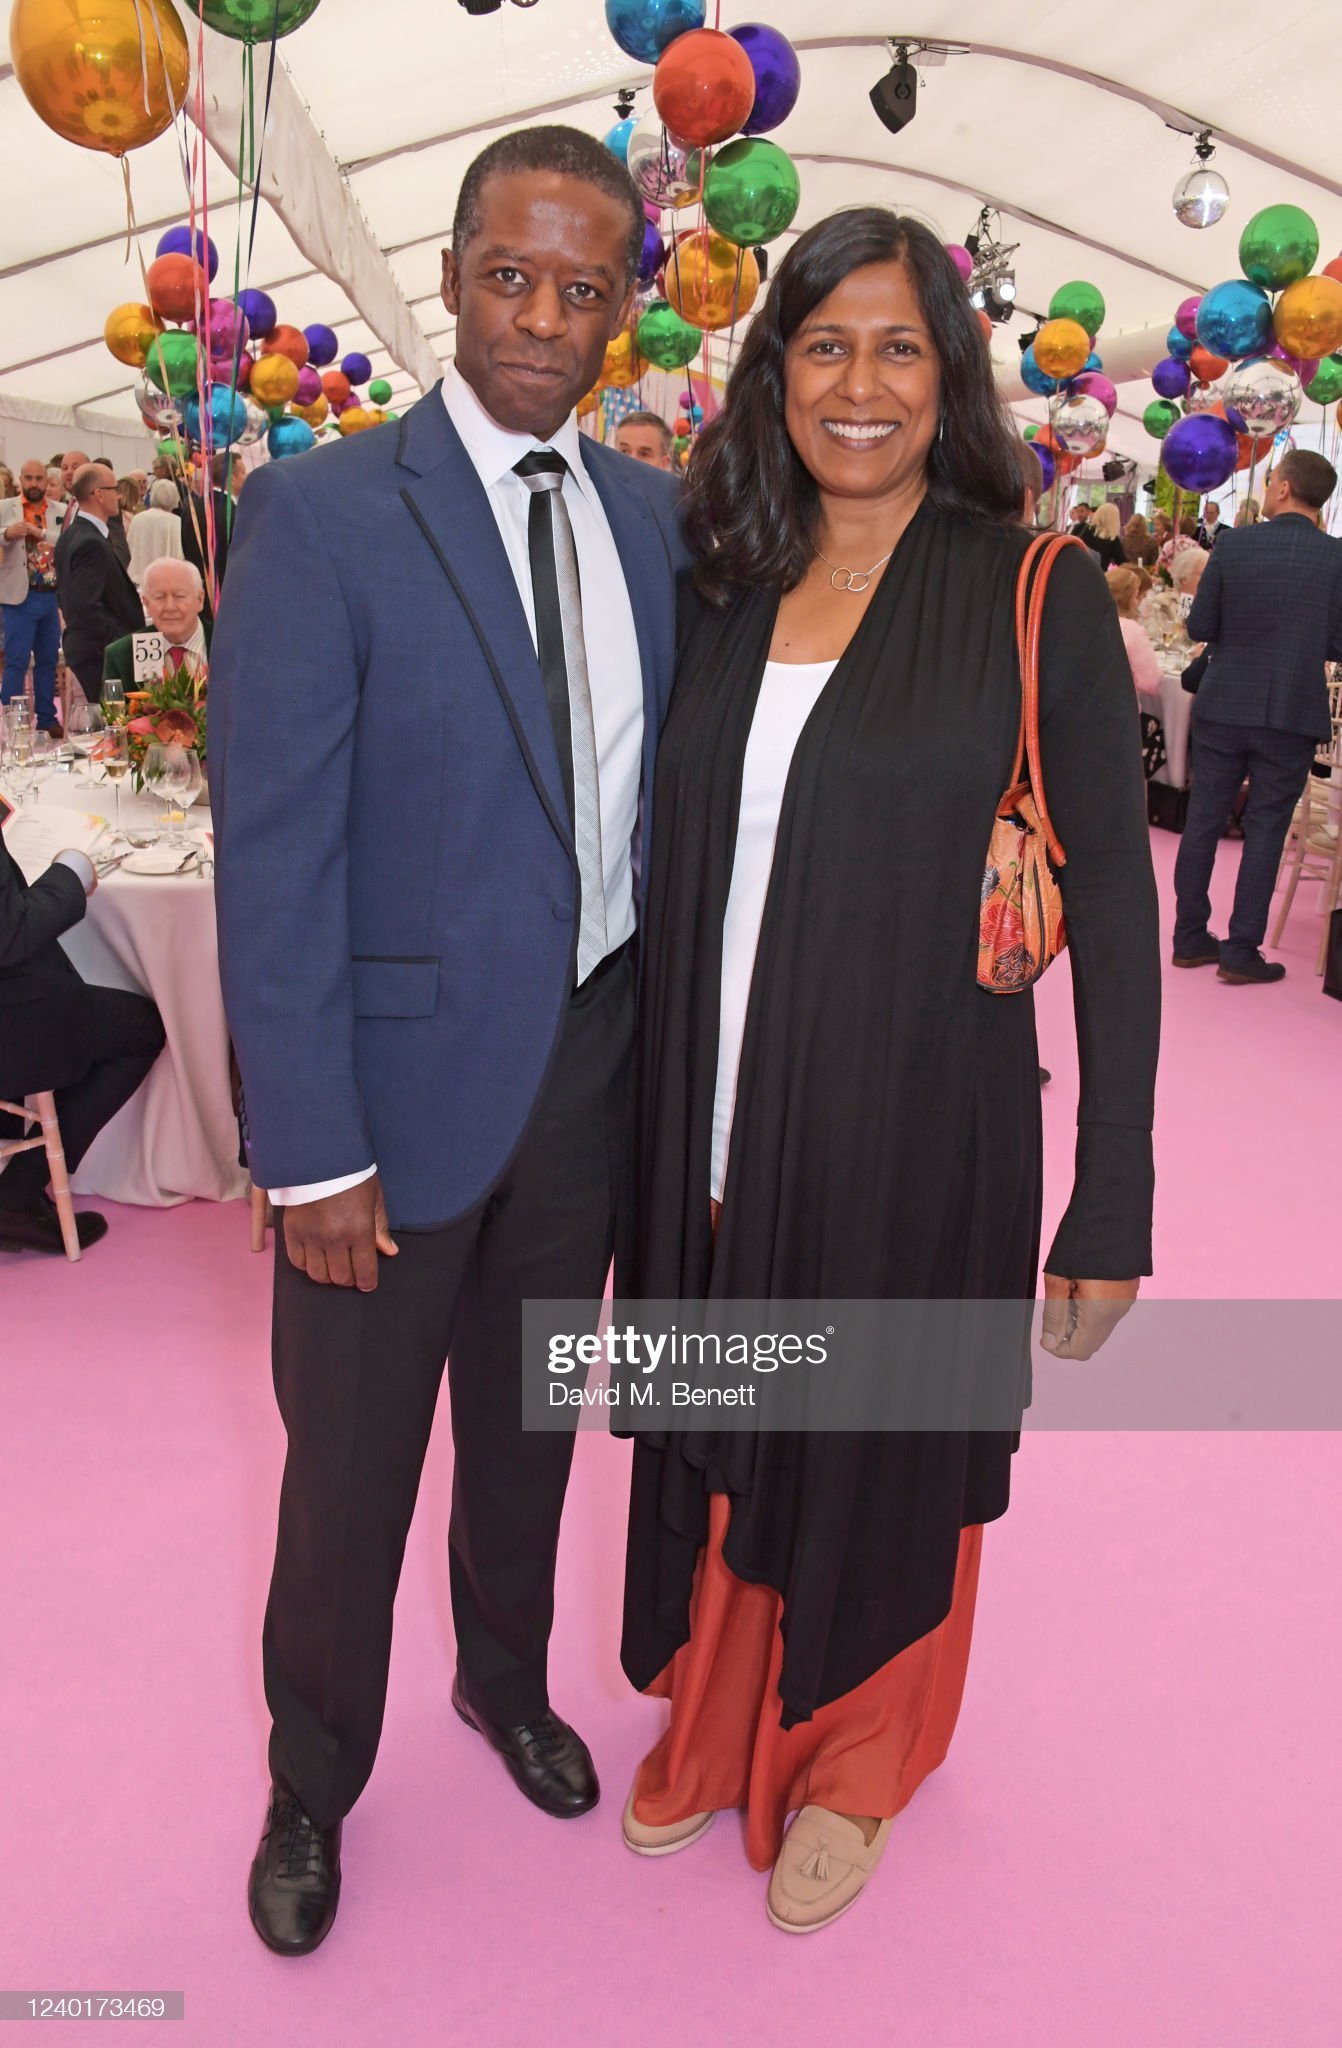 STRATFORD-UPON-AVON, ENGLAND - APRIL 23:  Adrian Lester and Playwright Lolita Chakrabarti attend Shakespeare's Birthday lunch presented by Pragnell and hosted by Alexander Armstrong in the grounds of the Royal Shakespeare Company on April 23, 2022 in Stratford-upon-Avon, England. (Photo by David M. Benett/Dave Benett/Getty Images for George Pragnell LTD)